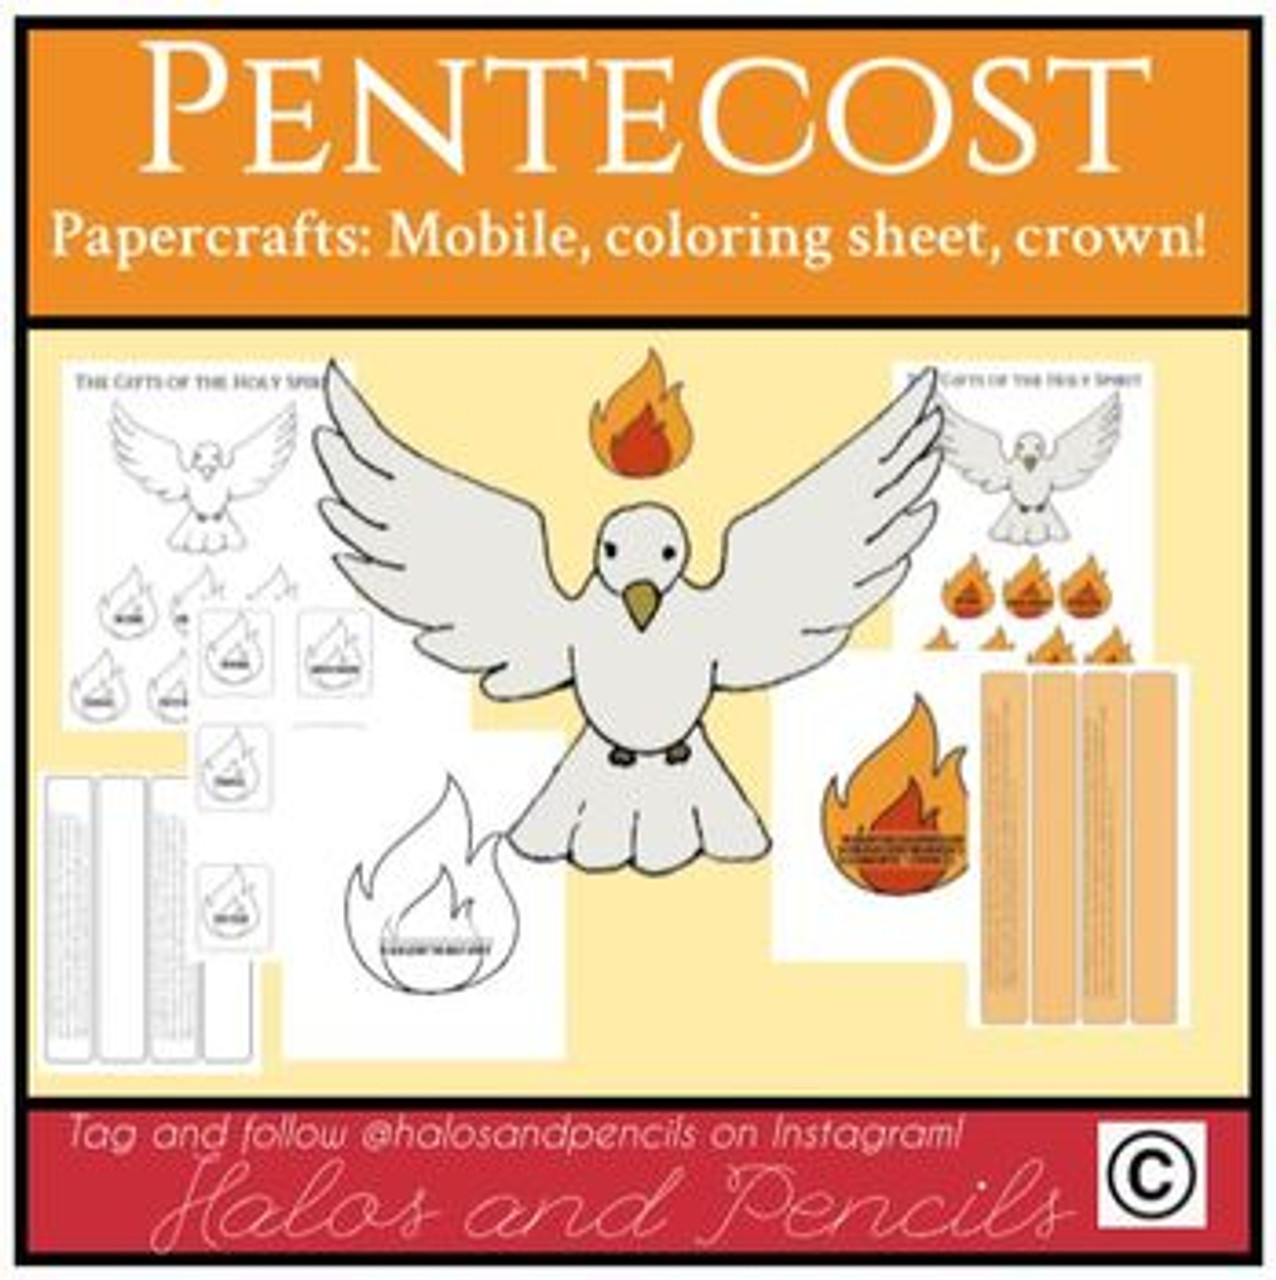 Pentecost gifts of the holy spirit confirmation crafts